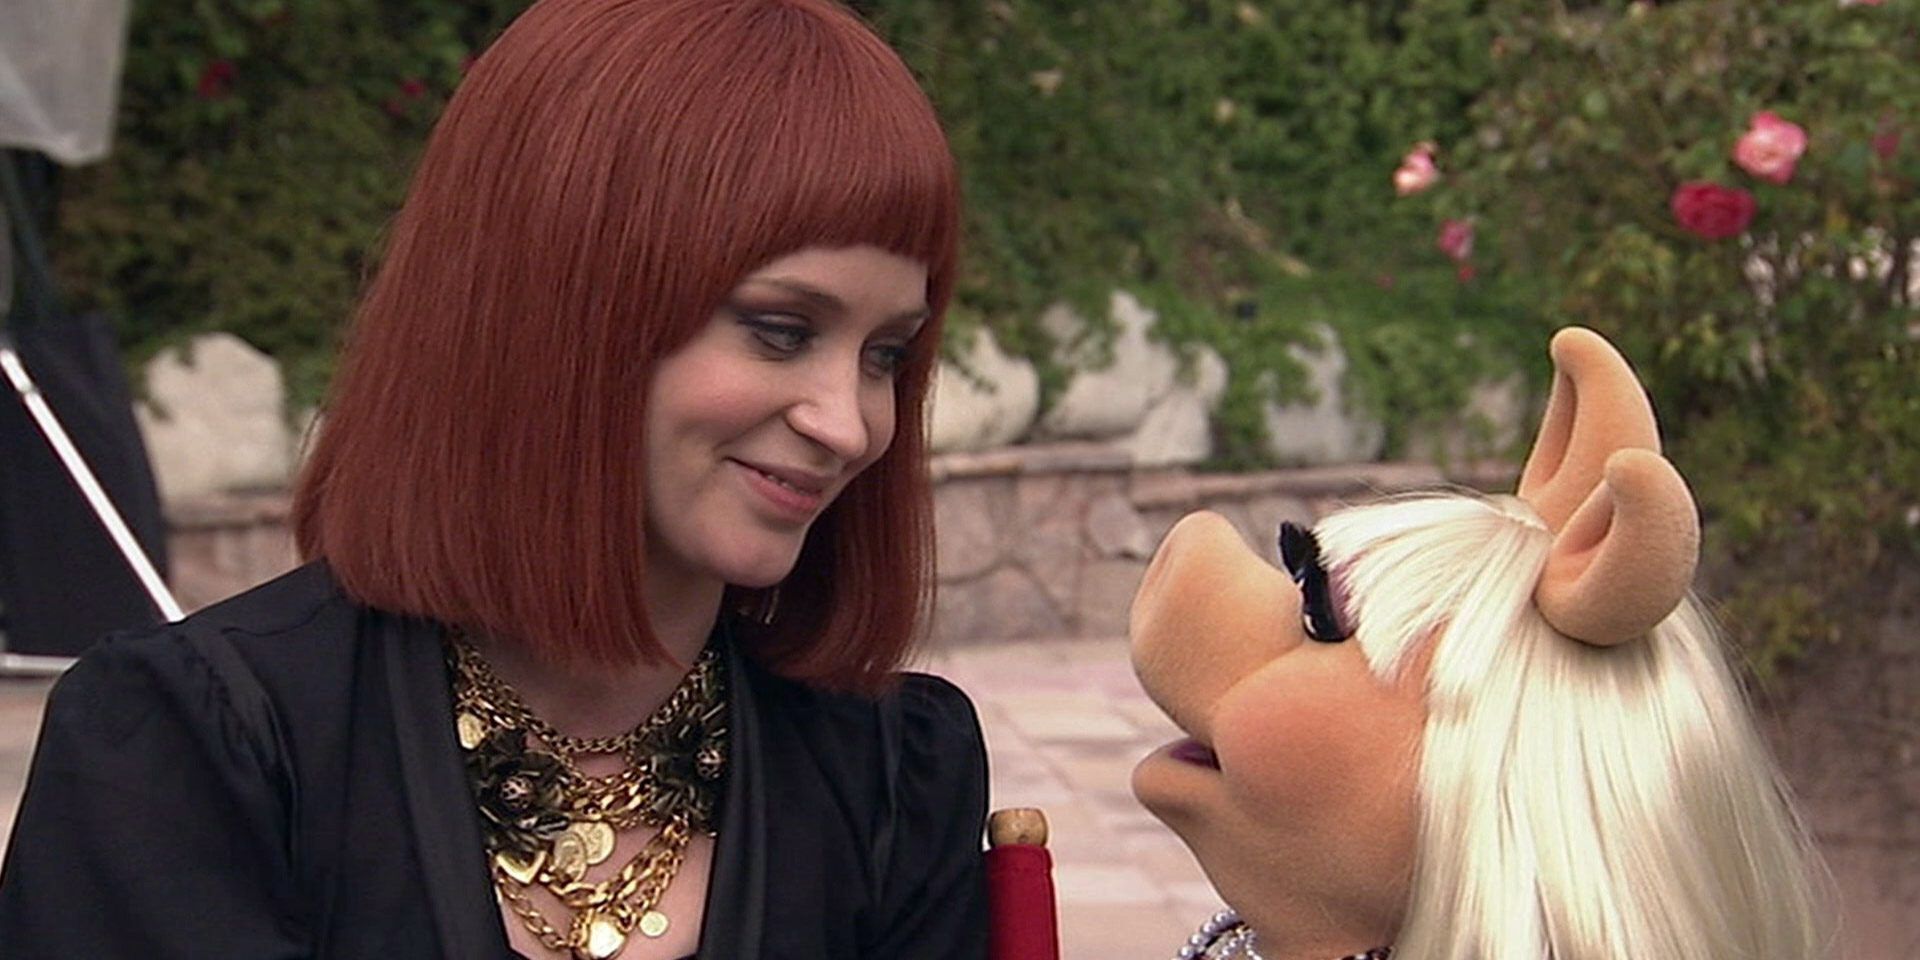 Miss Piggy and her receptionist, played by Emily Blunt in The Muppets